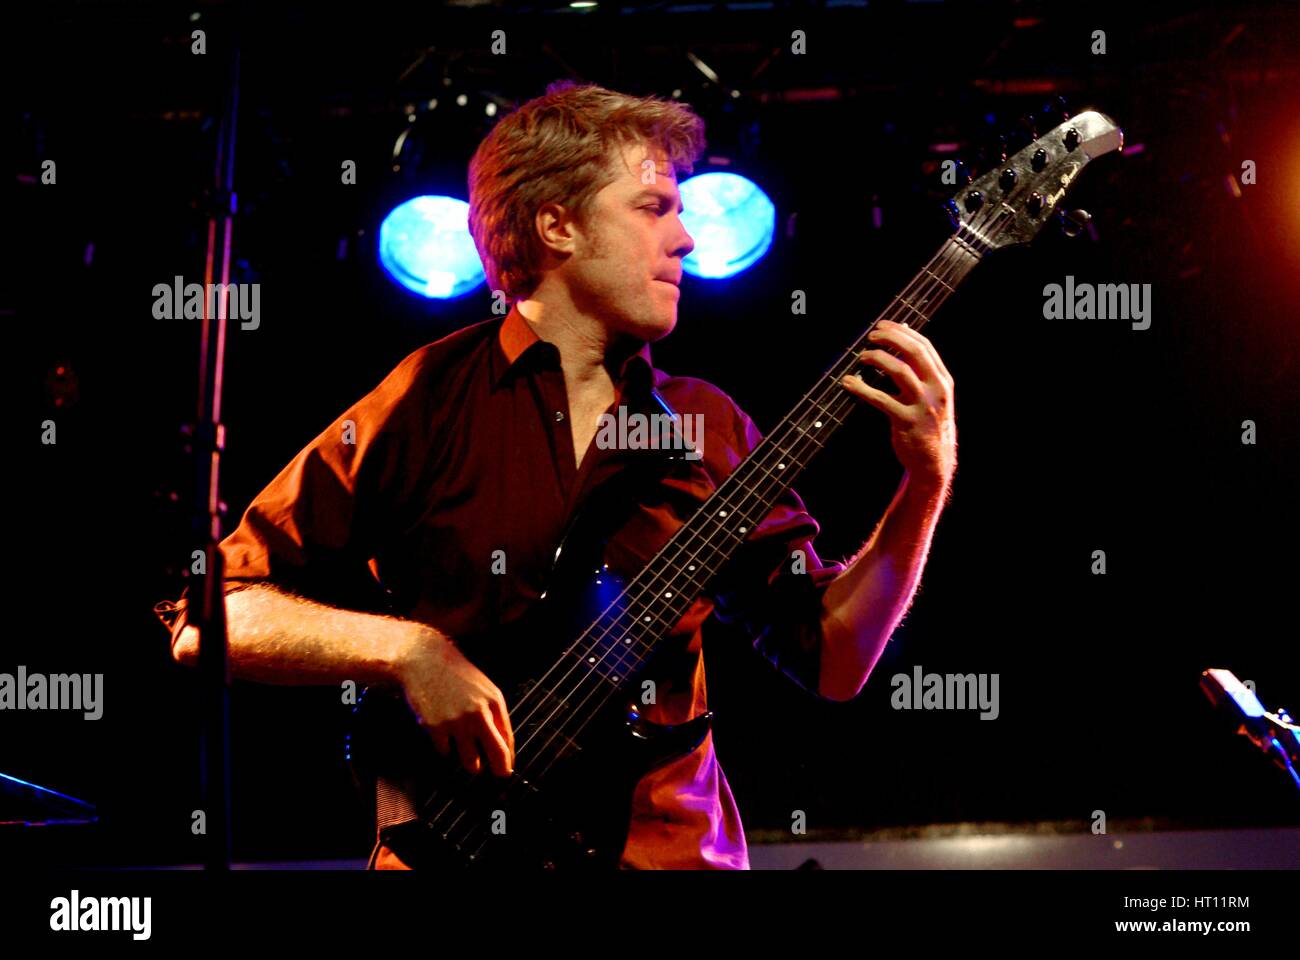 Kyle Eastwood (son of Clint Eastwood), Imperial Wharf Jazz Festival, London.  Artist: Brian O'Connor Stock Photo